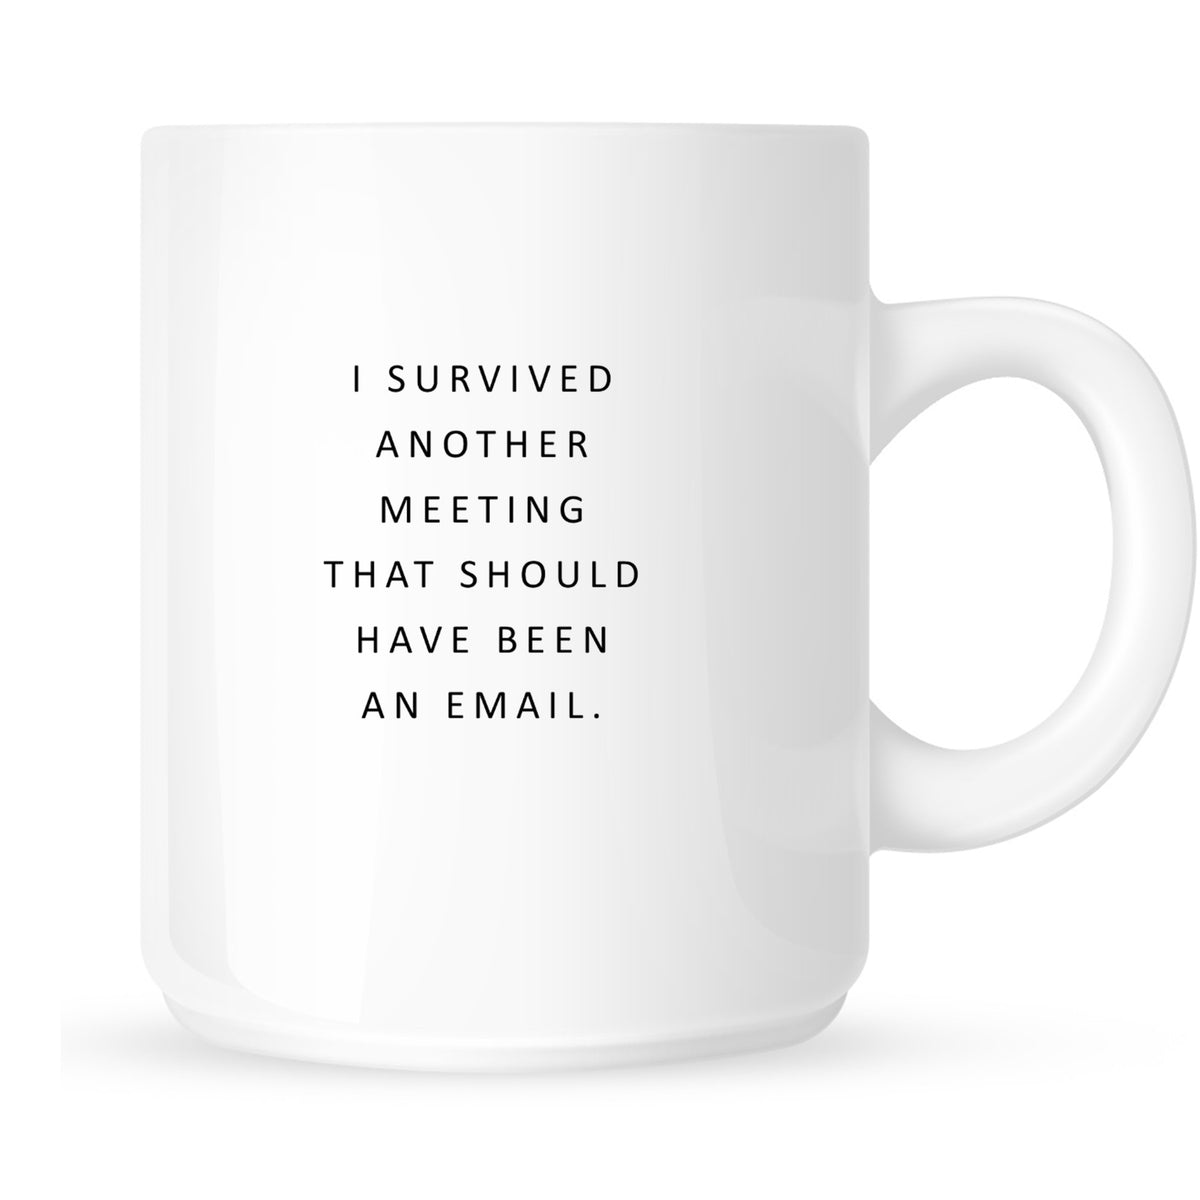 Mug - I Survived Another Meeting That Could Have Been an Email